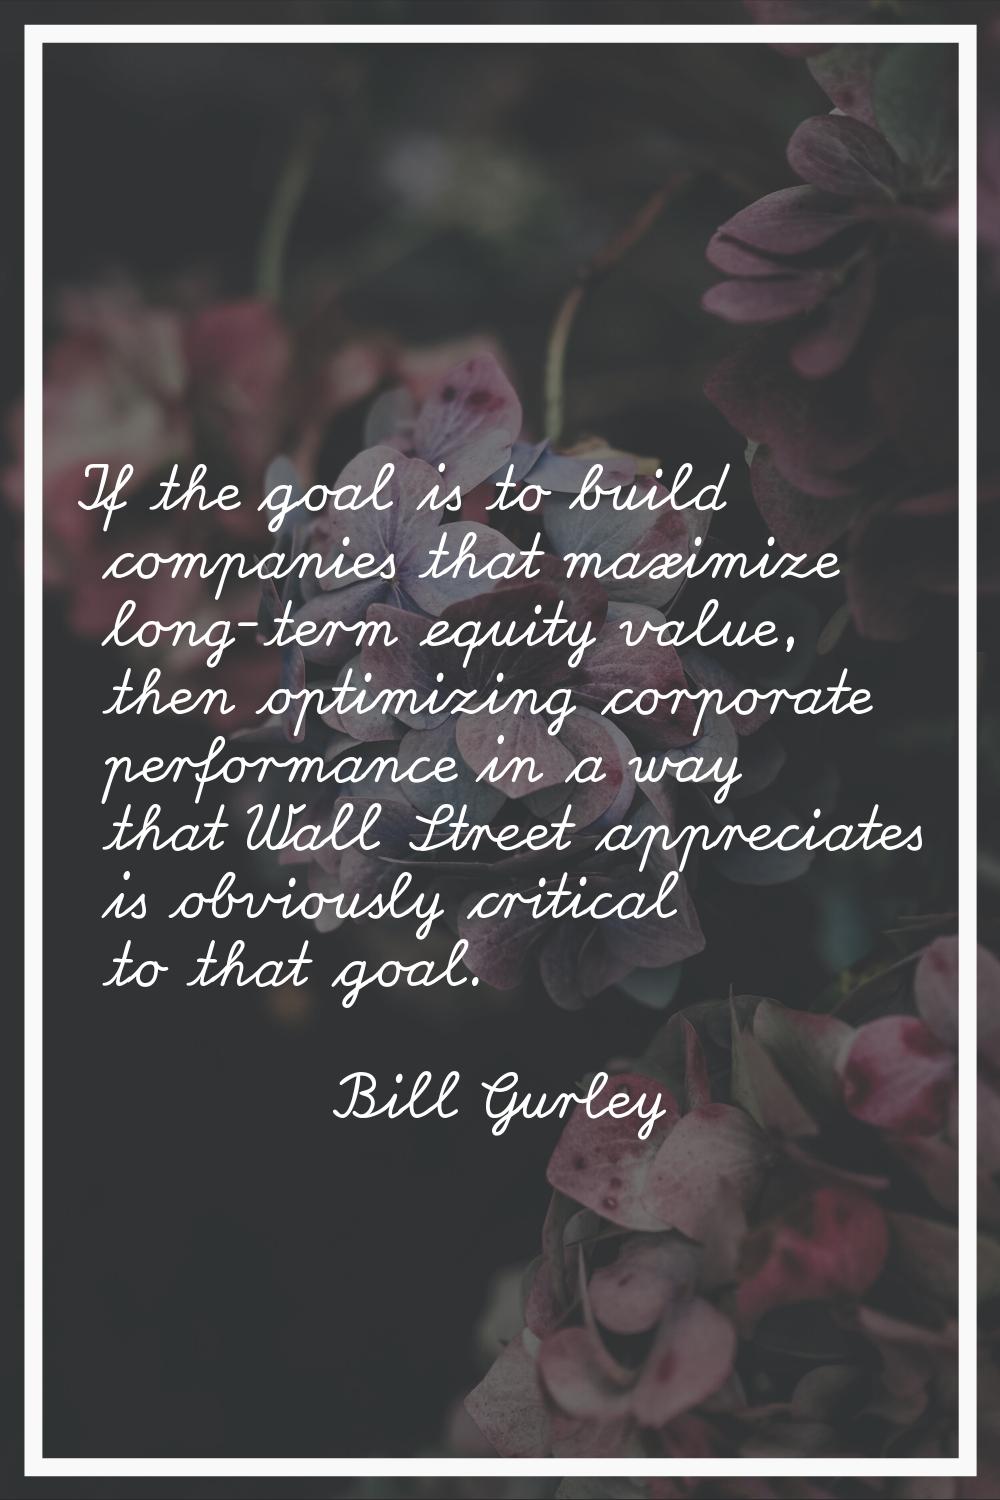 If the goal is to build companies that maximize long-term equity value, then optimizing corporate p